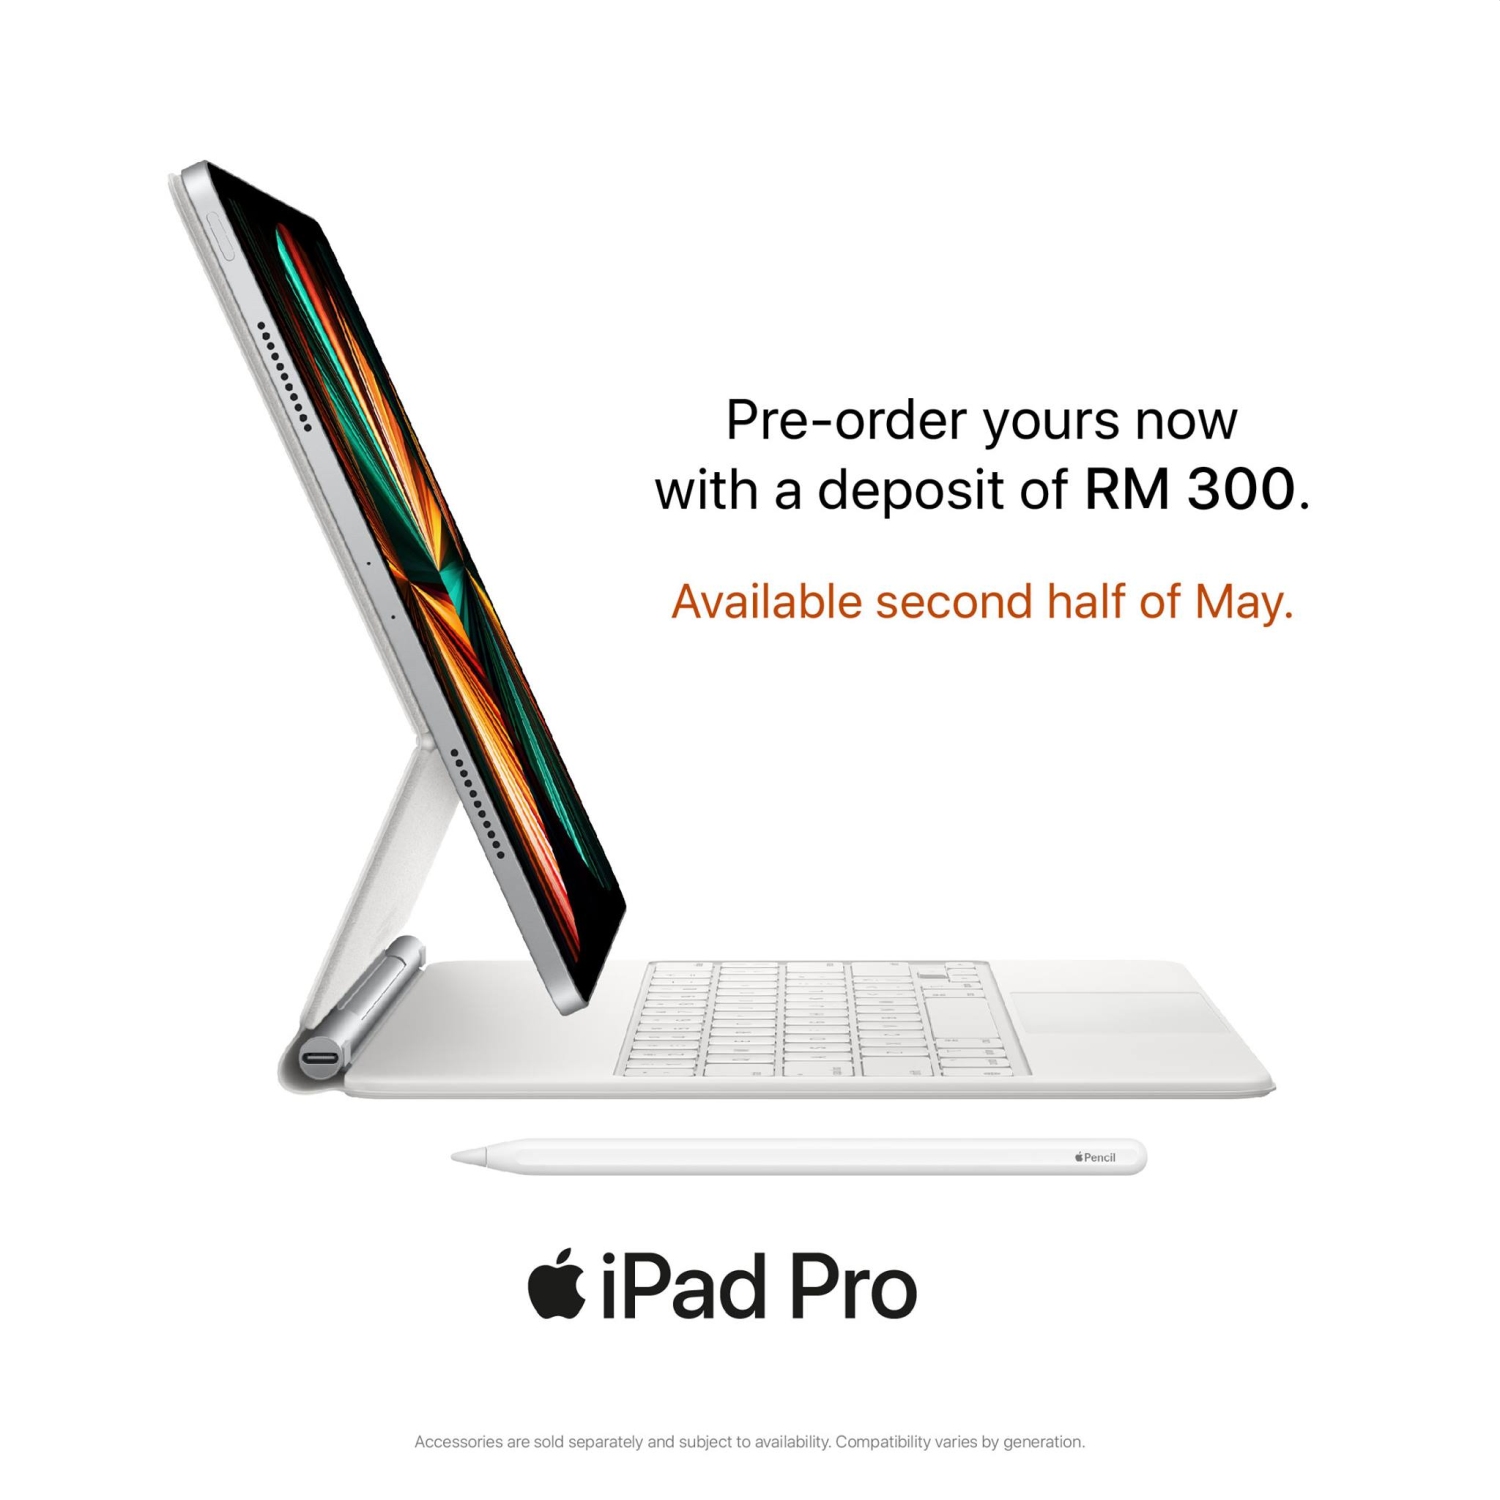 iPad Pro 2021 now available for purchase in Malaysia, stocks available